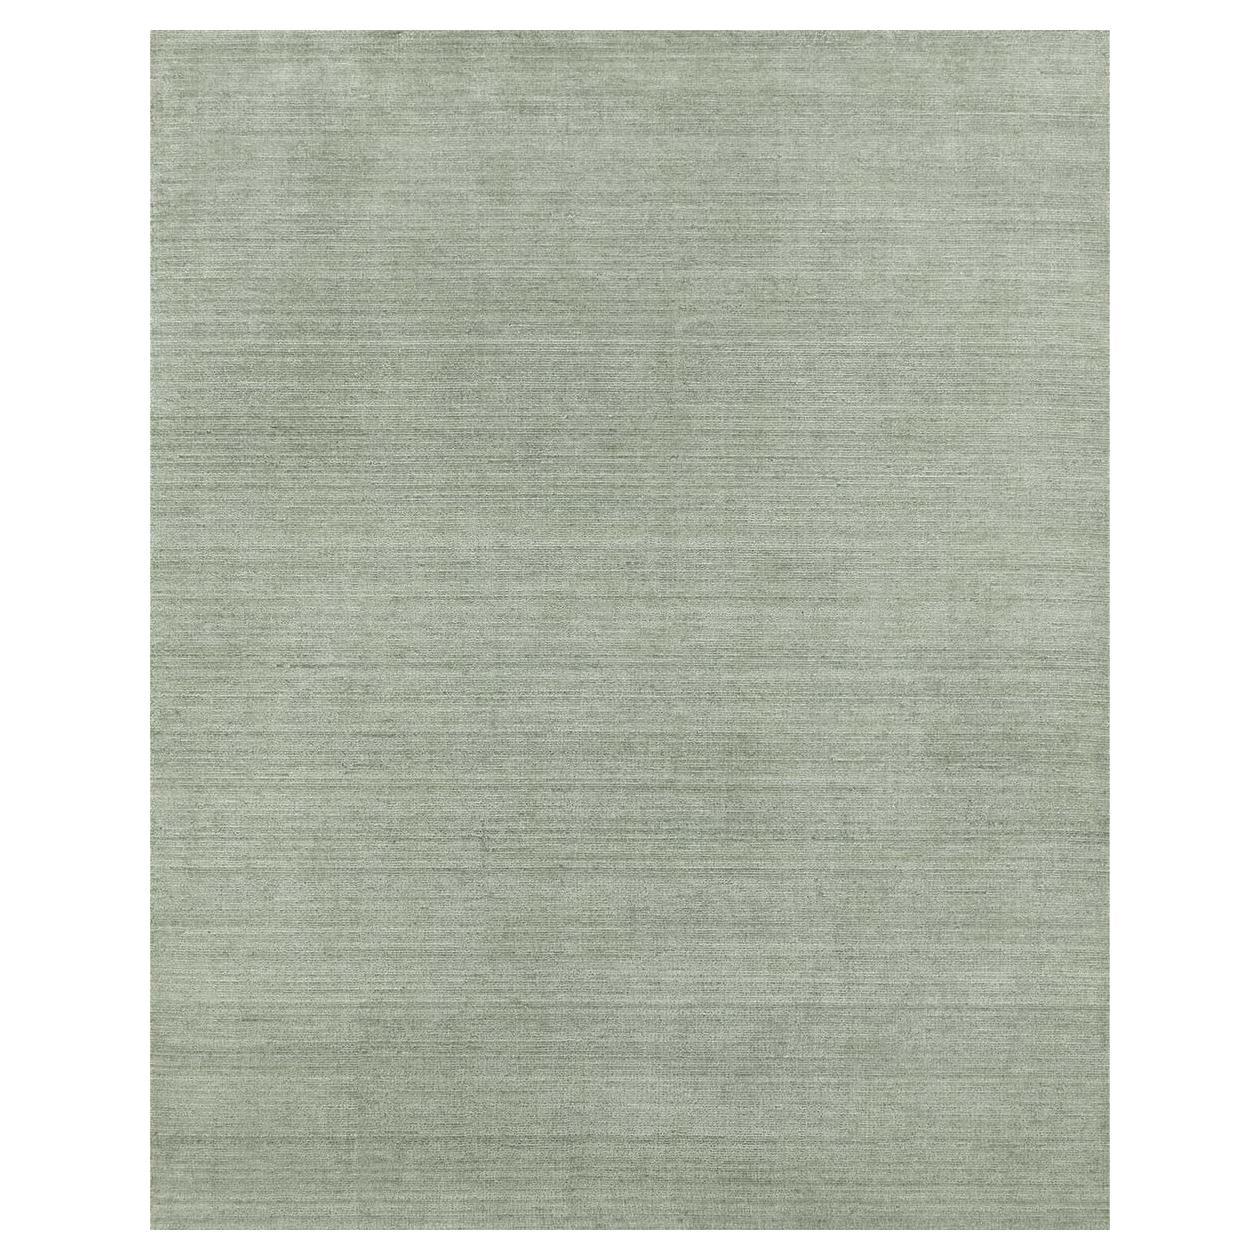 Luxurious Hand Loomed Light Green Area Rug For Sale